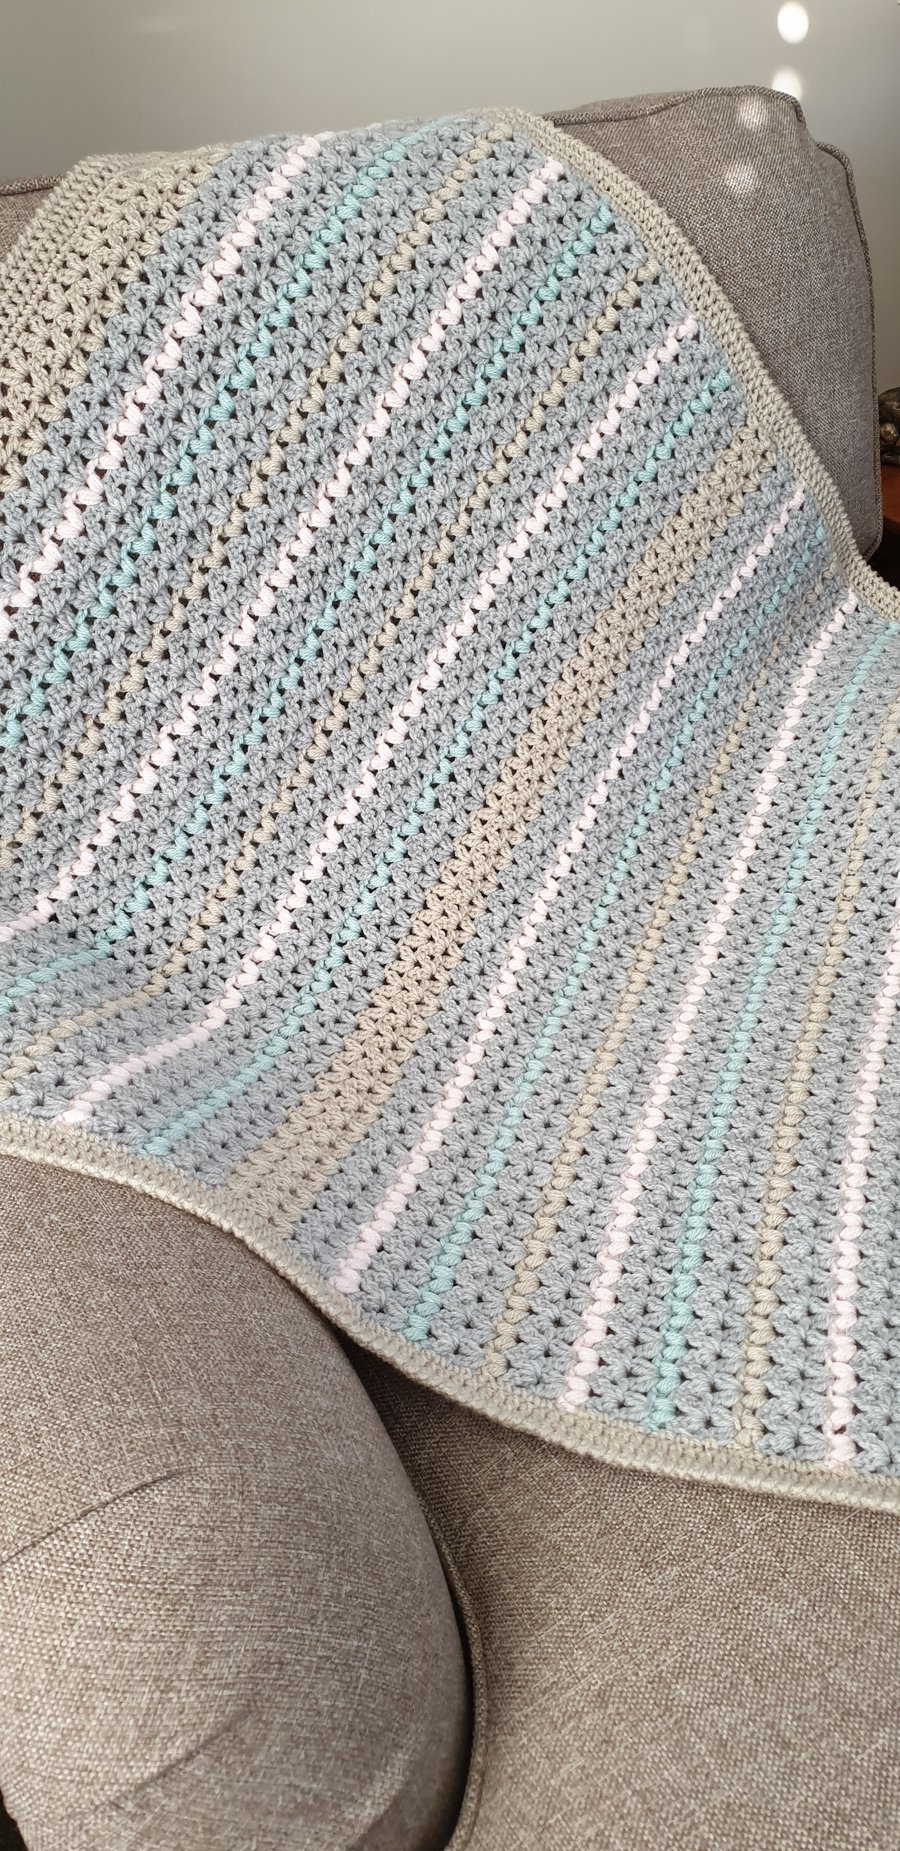 Neutrals, Baby pink and Teal Crochet Blanket